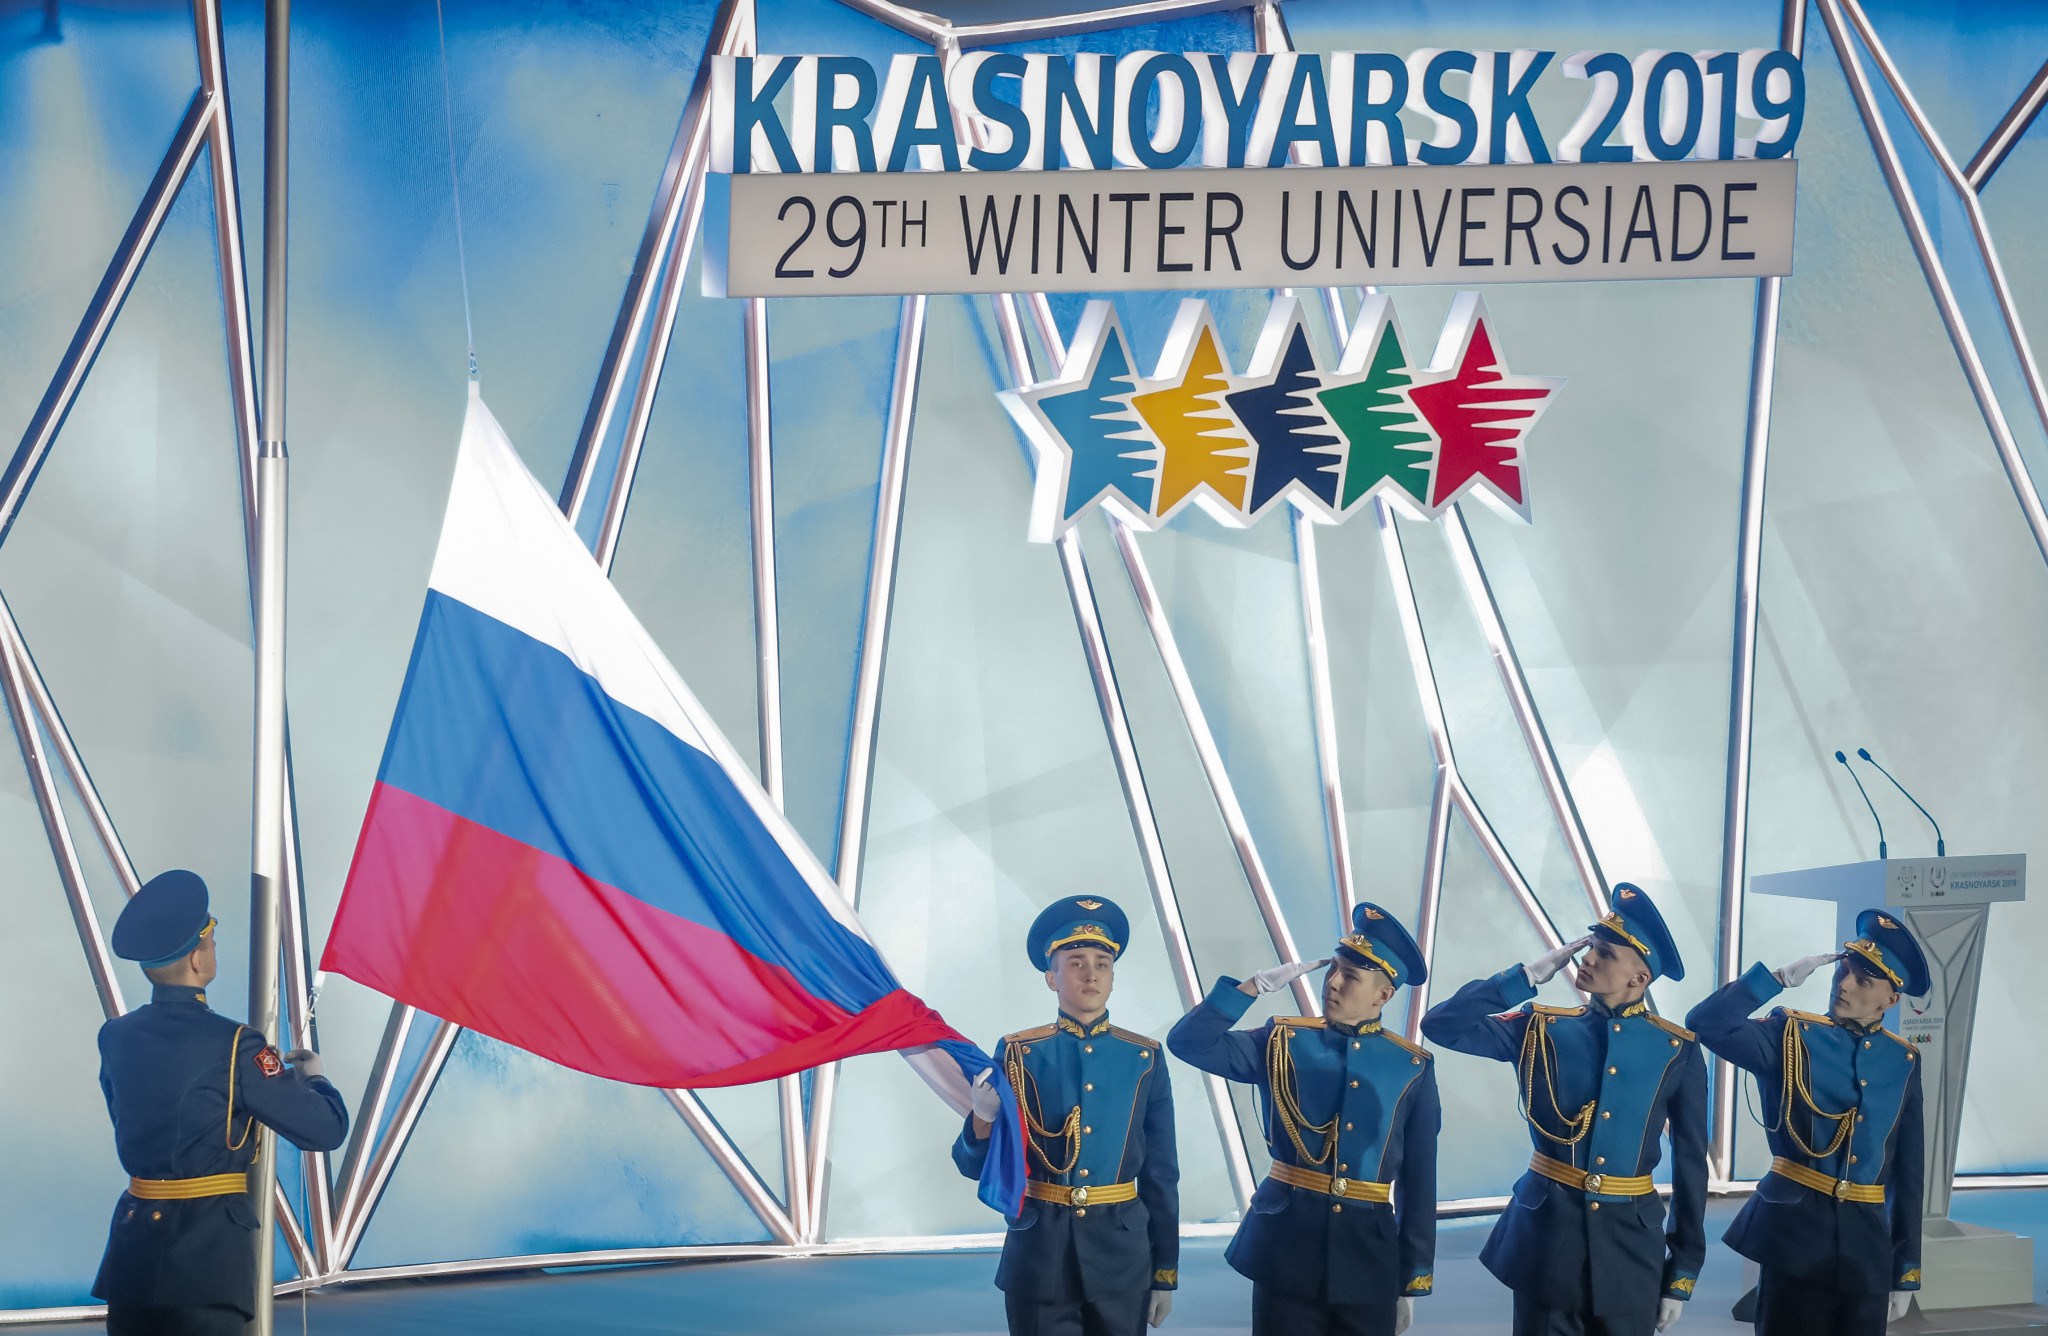 The deal has already led to coverage of the Krasnoyarsk 2019 Winter Universiade ©Getty Images